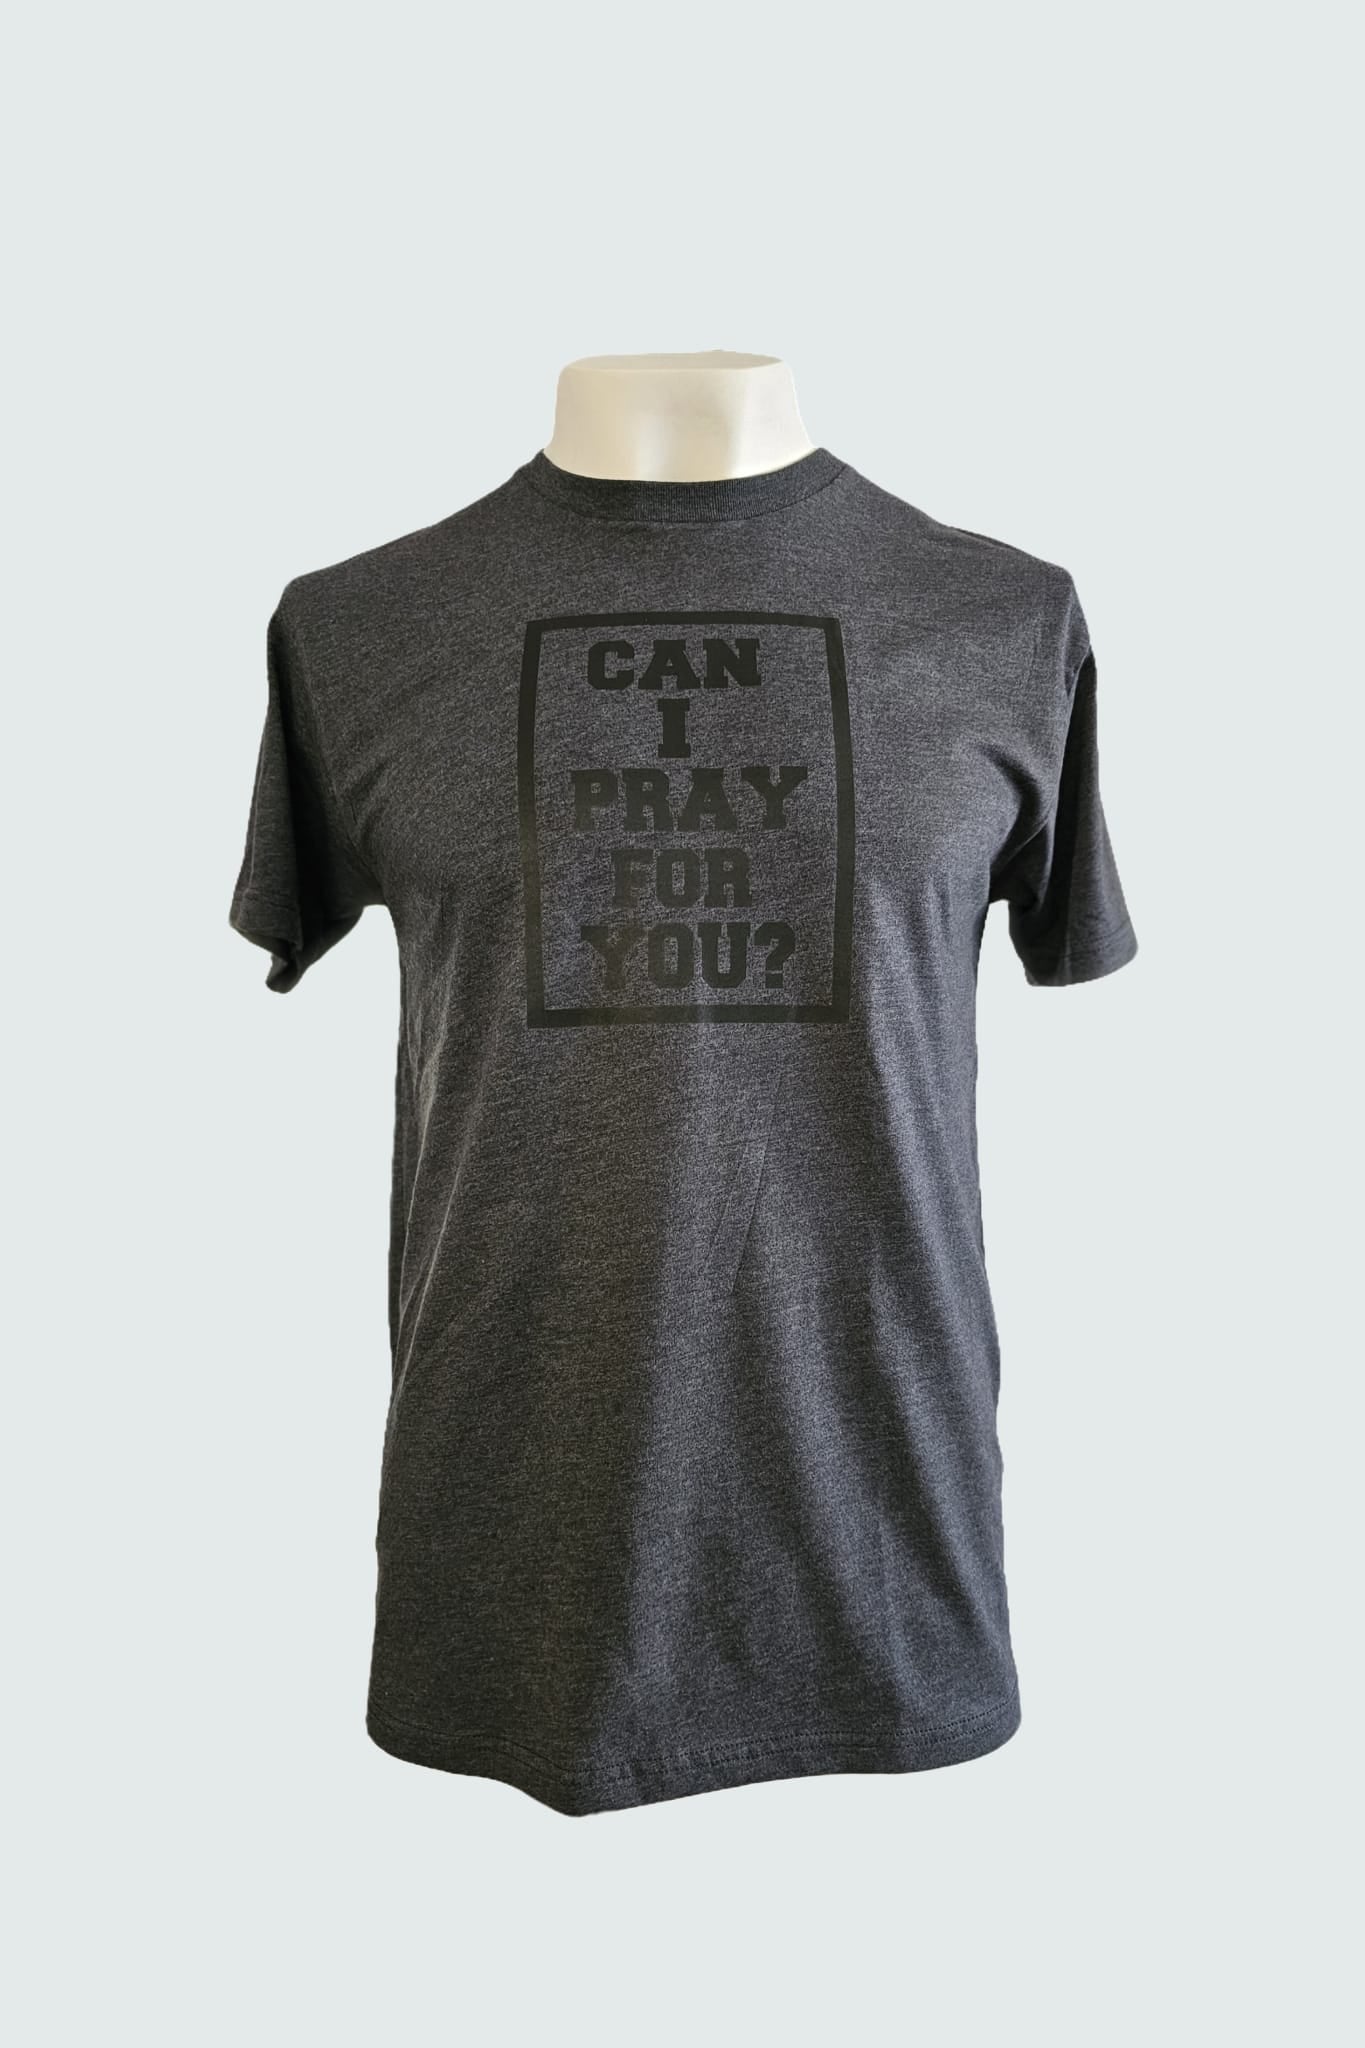 Can I Pray For You SLB Shirt